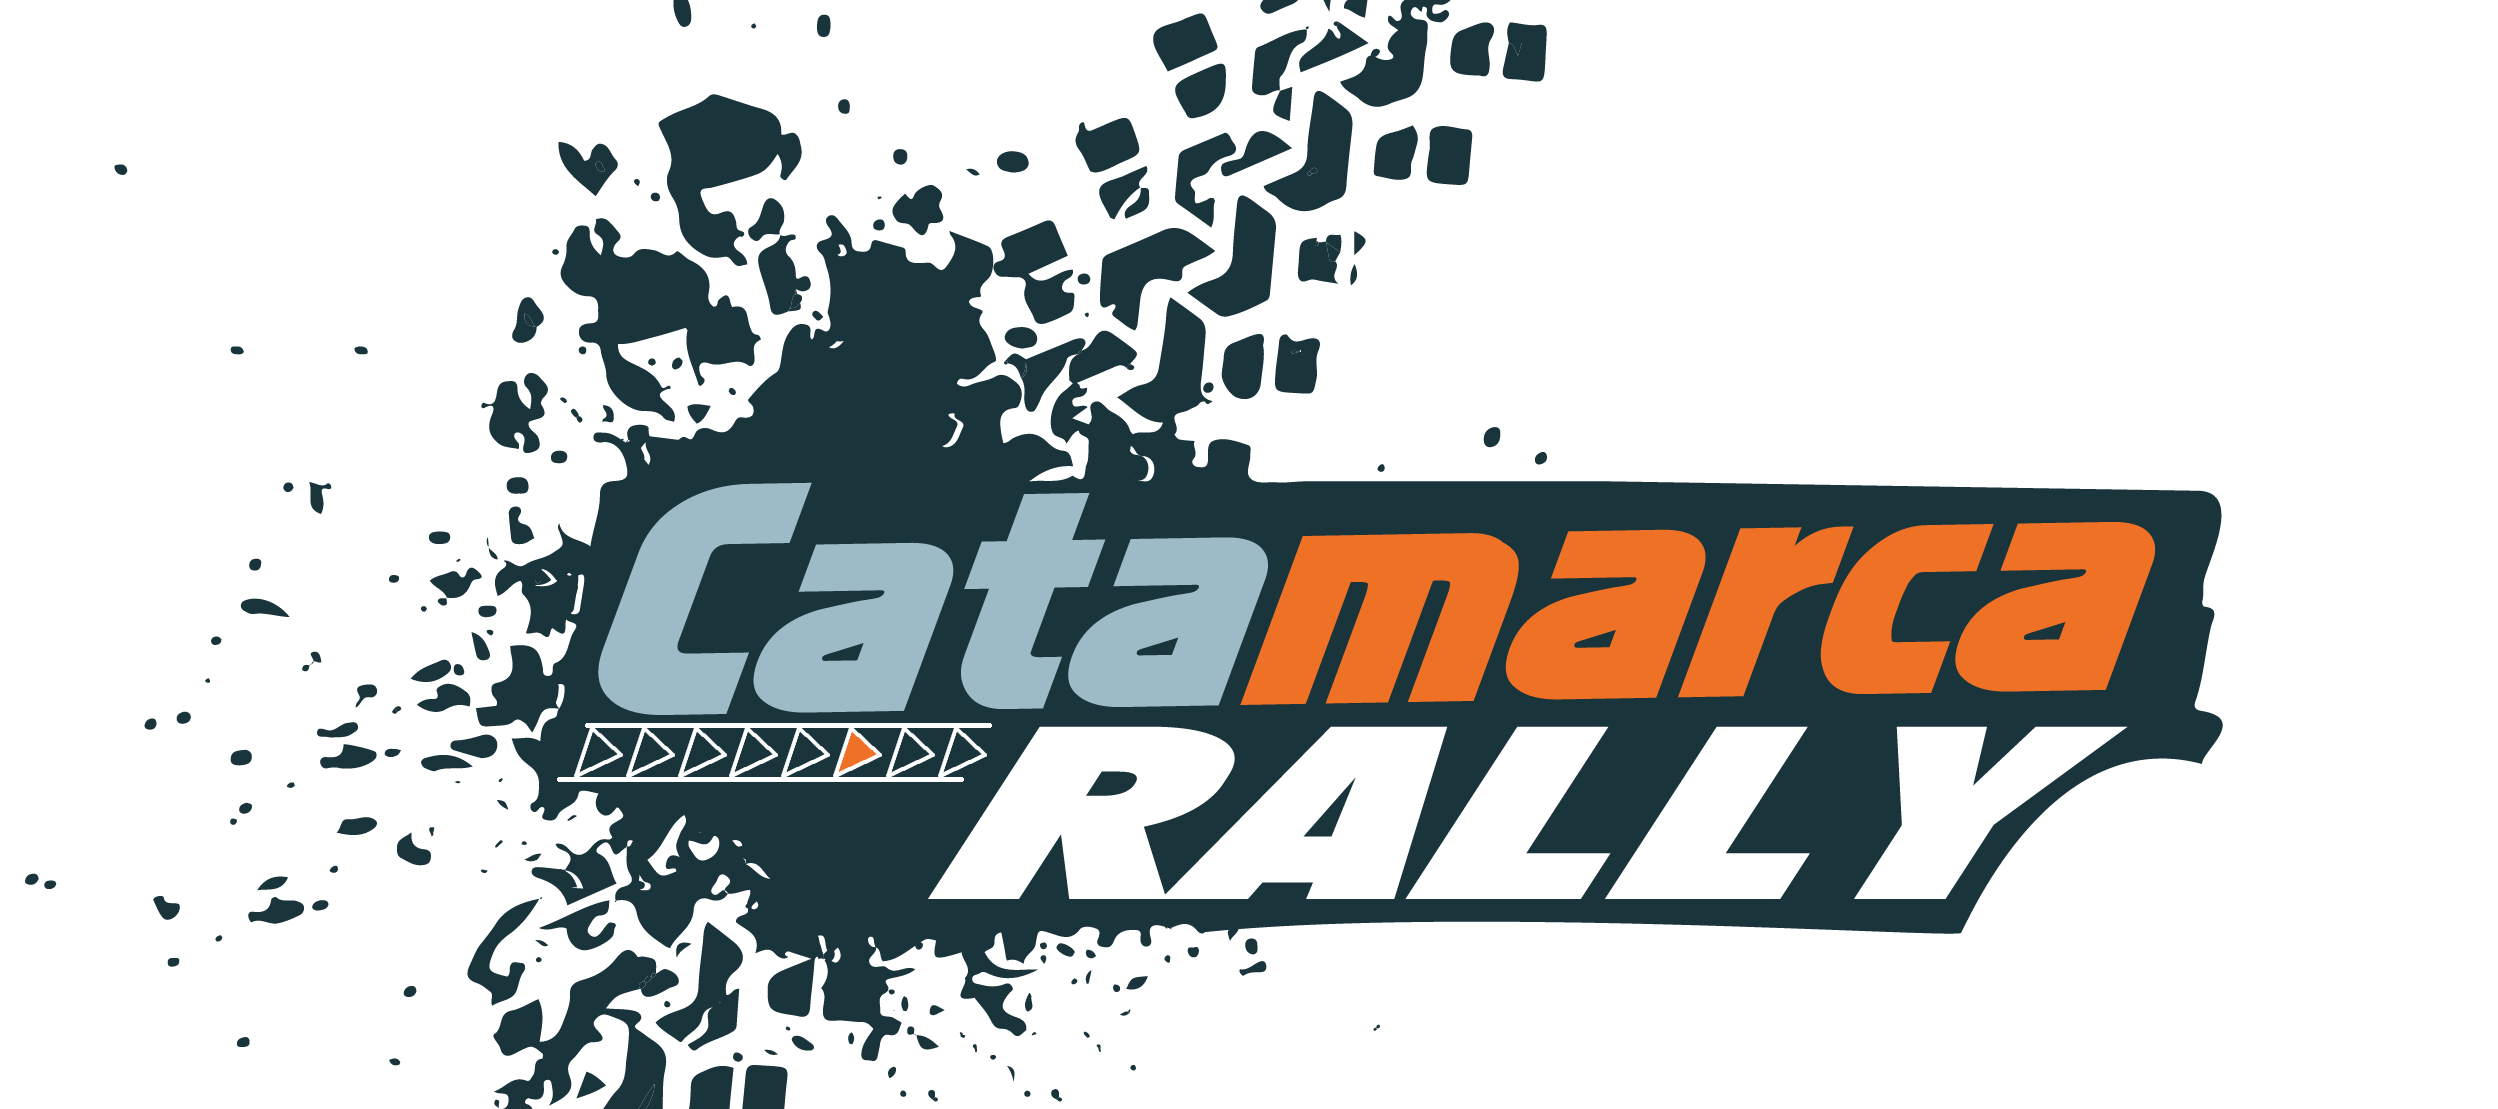 ::CatamarcaRally::